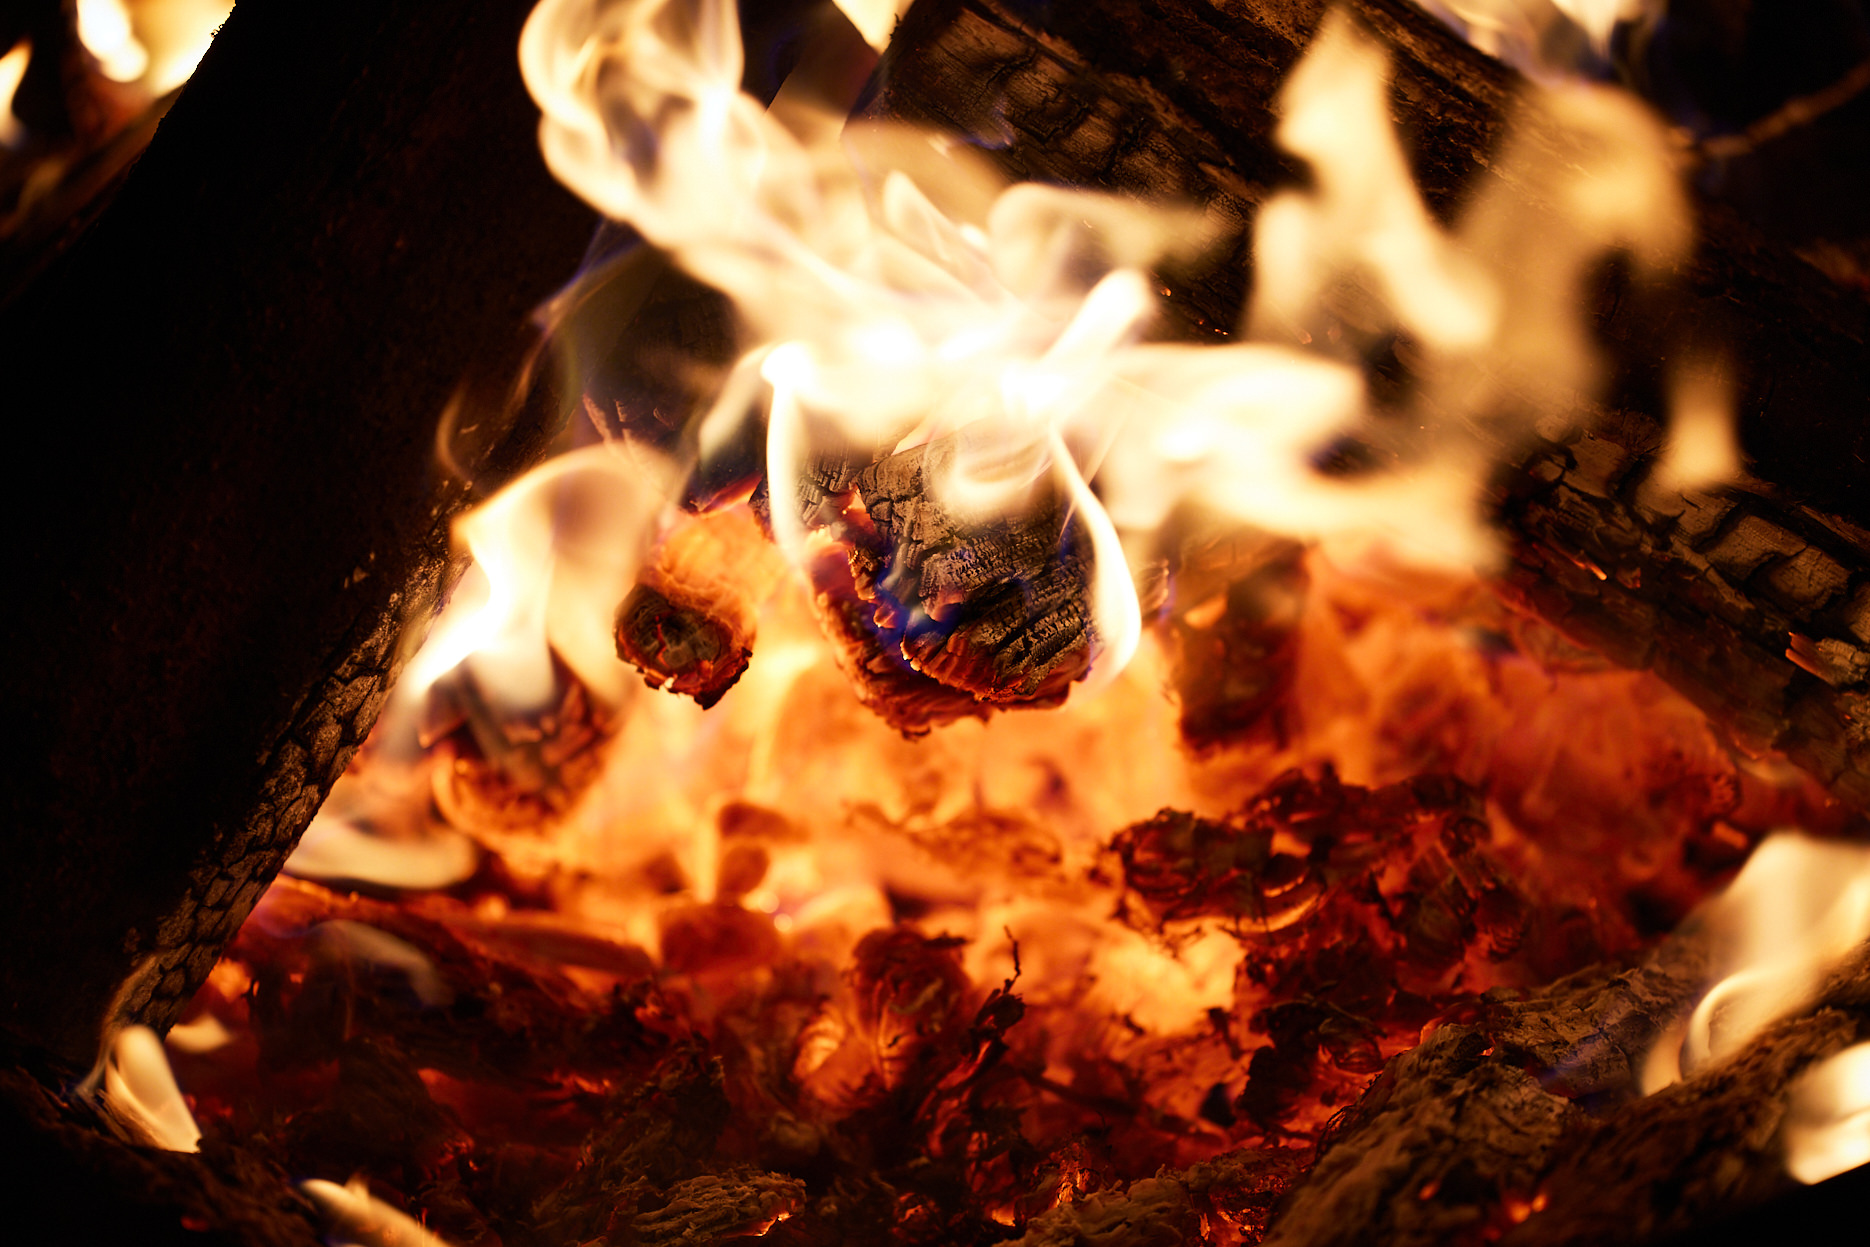 A close up of a burning fire pit